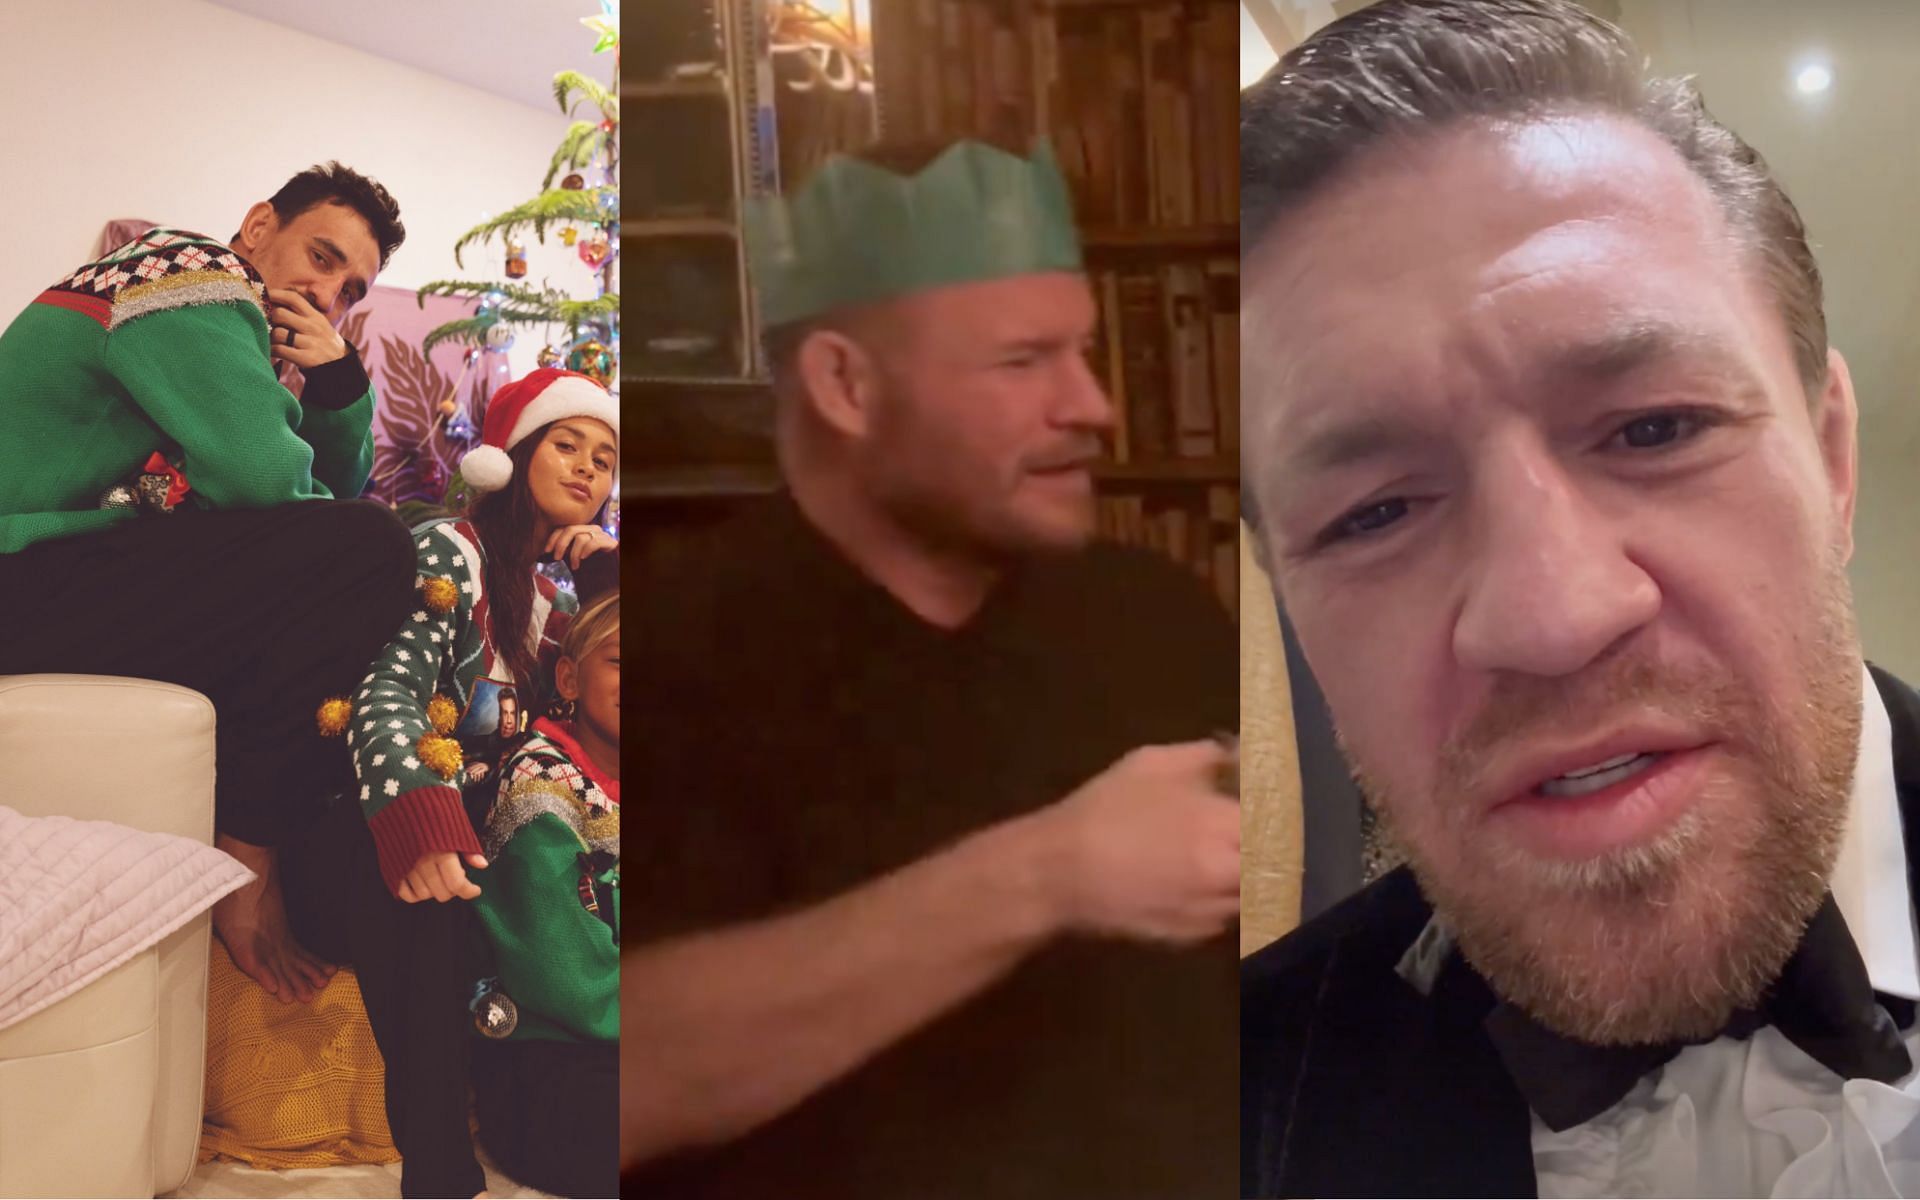 Max Holloway (left), Michael Bisping (center) and Conor McGregor (right) share Christmas posts on social media [Photo Courtesy @blessedmma and @bisping on X, @thenotoriousmma on Instagram]